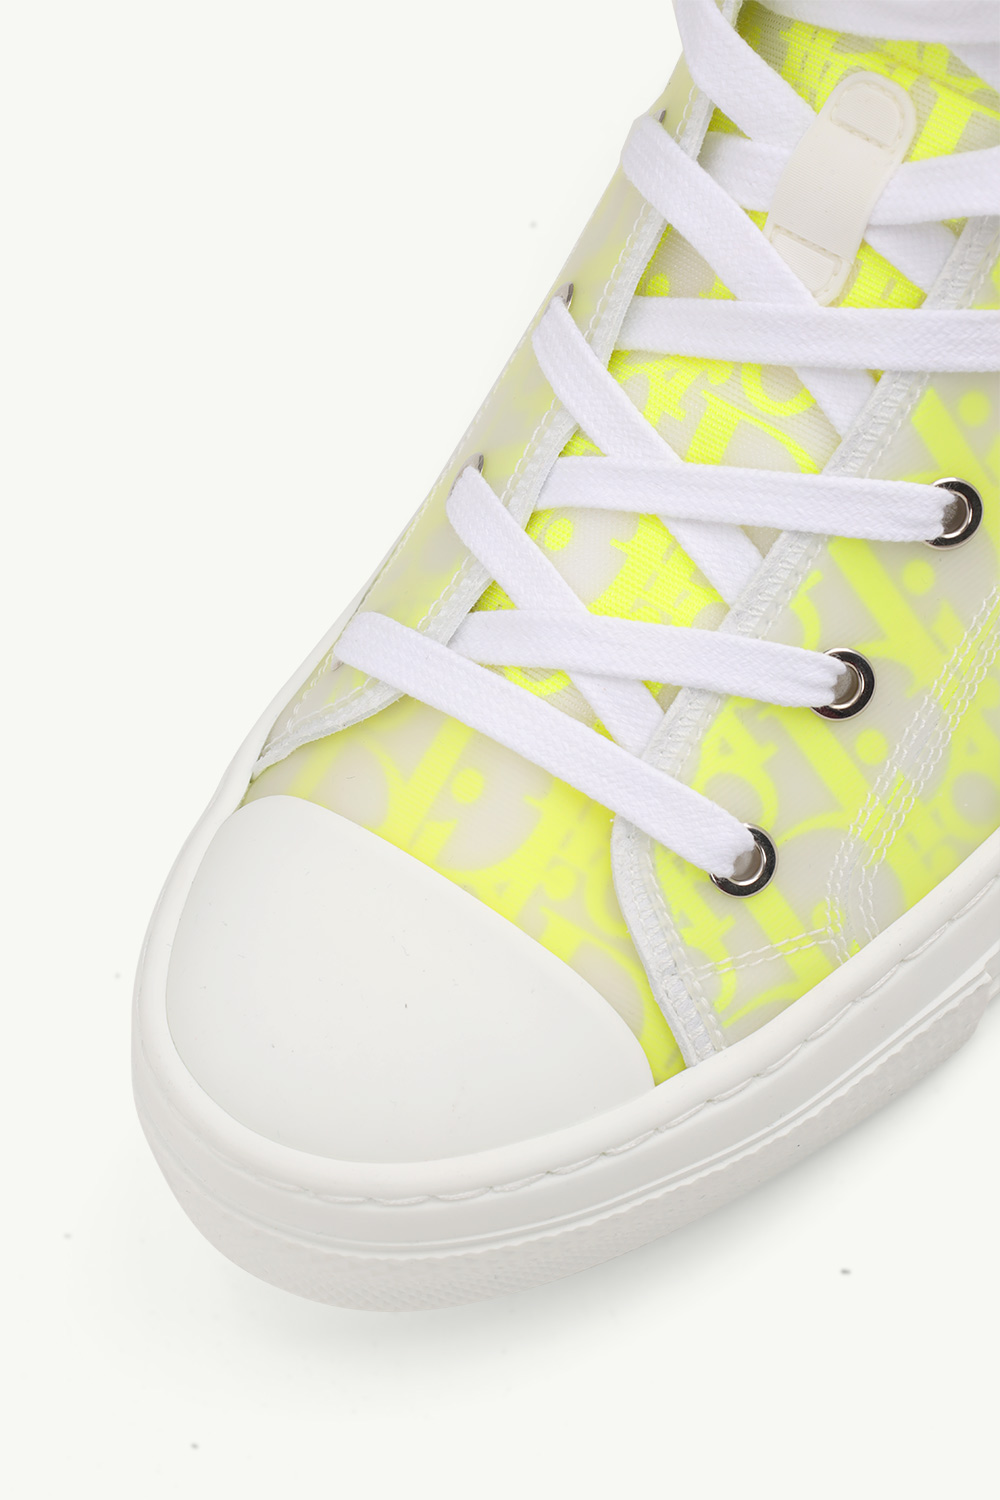 CHRISTIAN DIOR B23 Oblique High Top Sneakers in White/Yellow 4